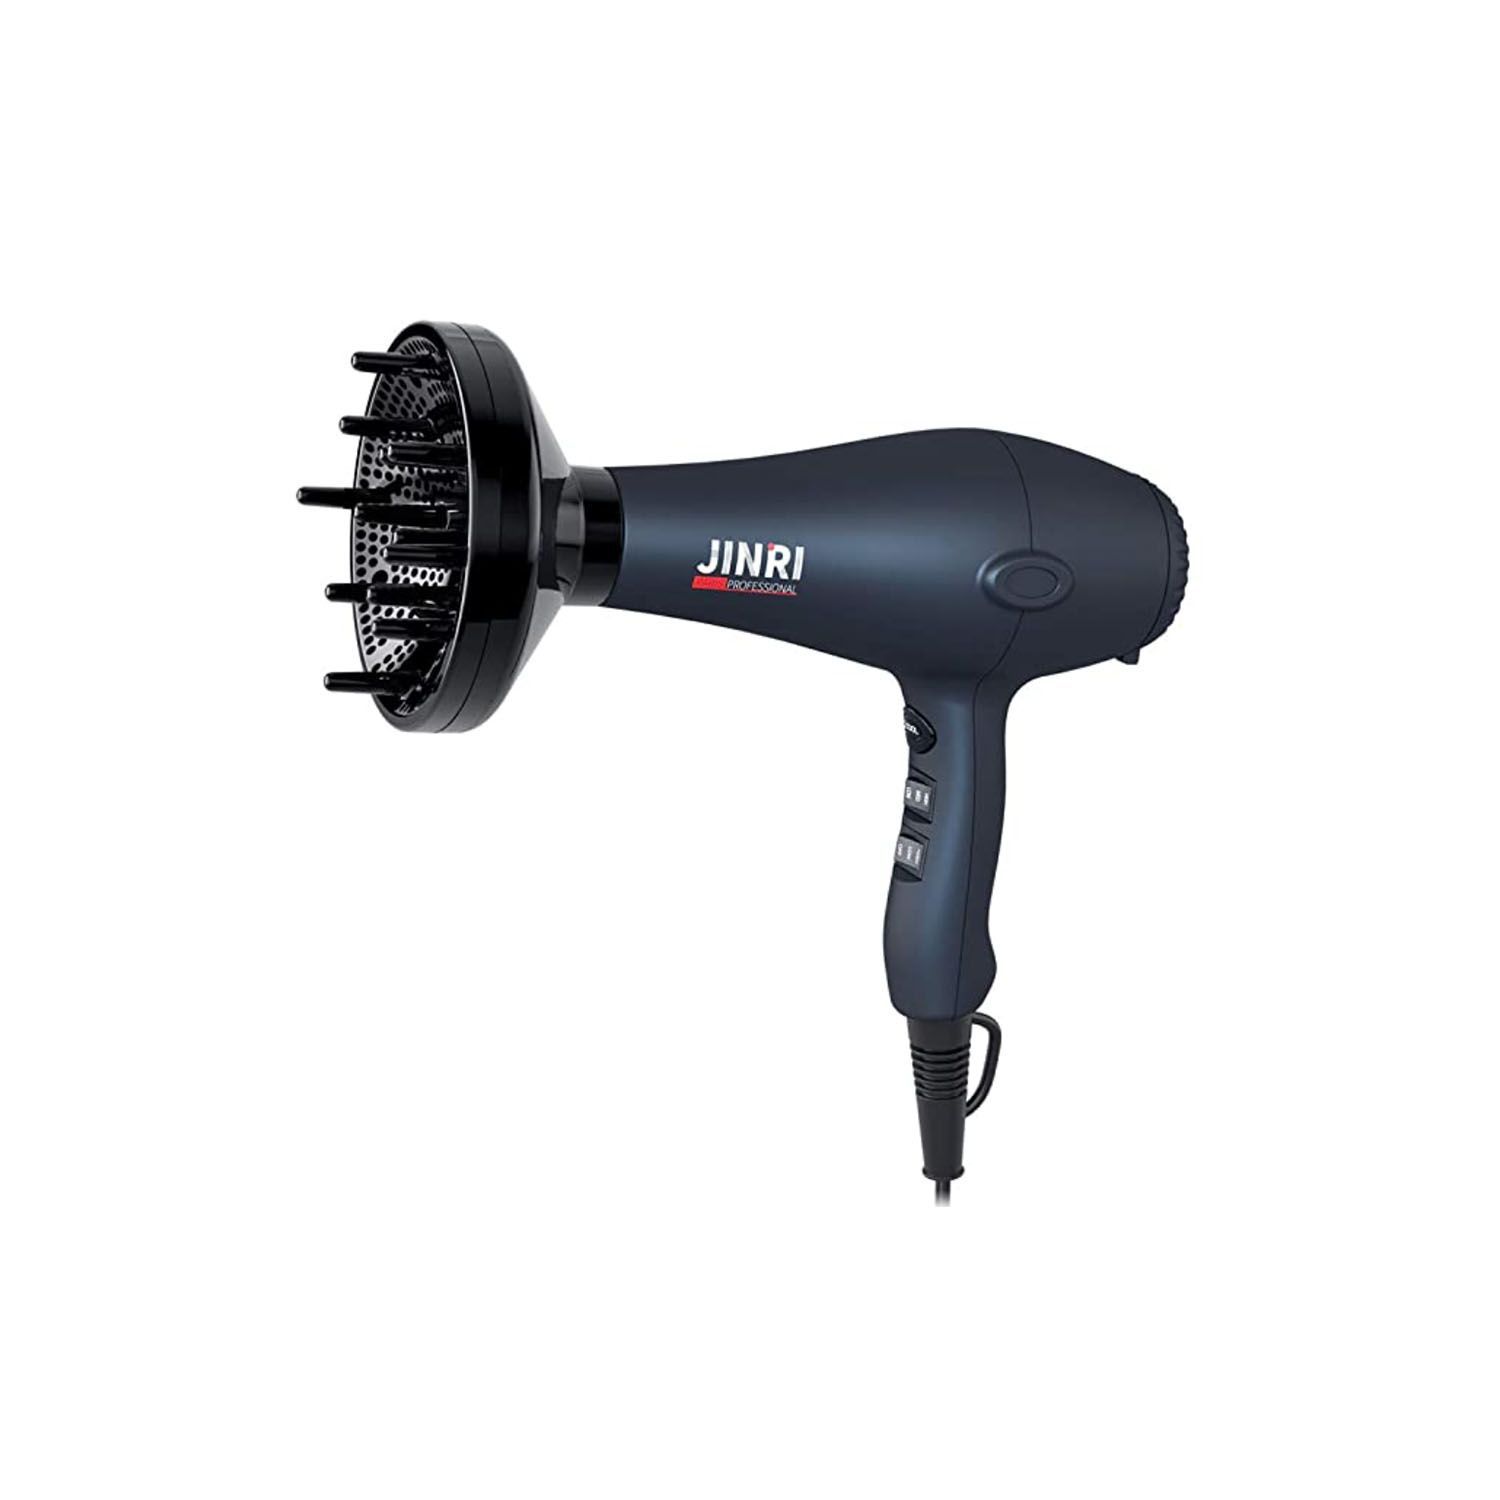 15 Best Affordable Hair Dryers 2022 - Top Inexpensive Blow Dryers